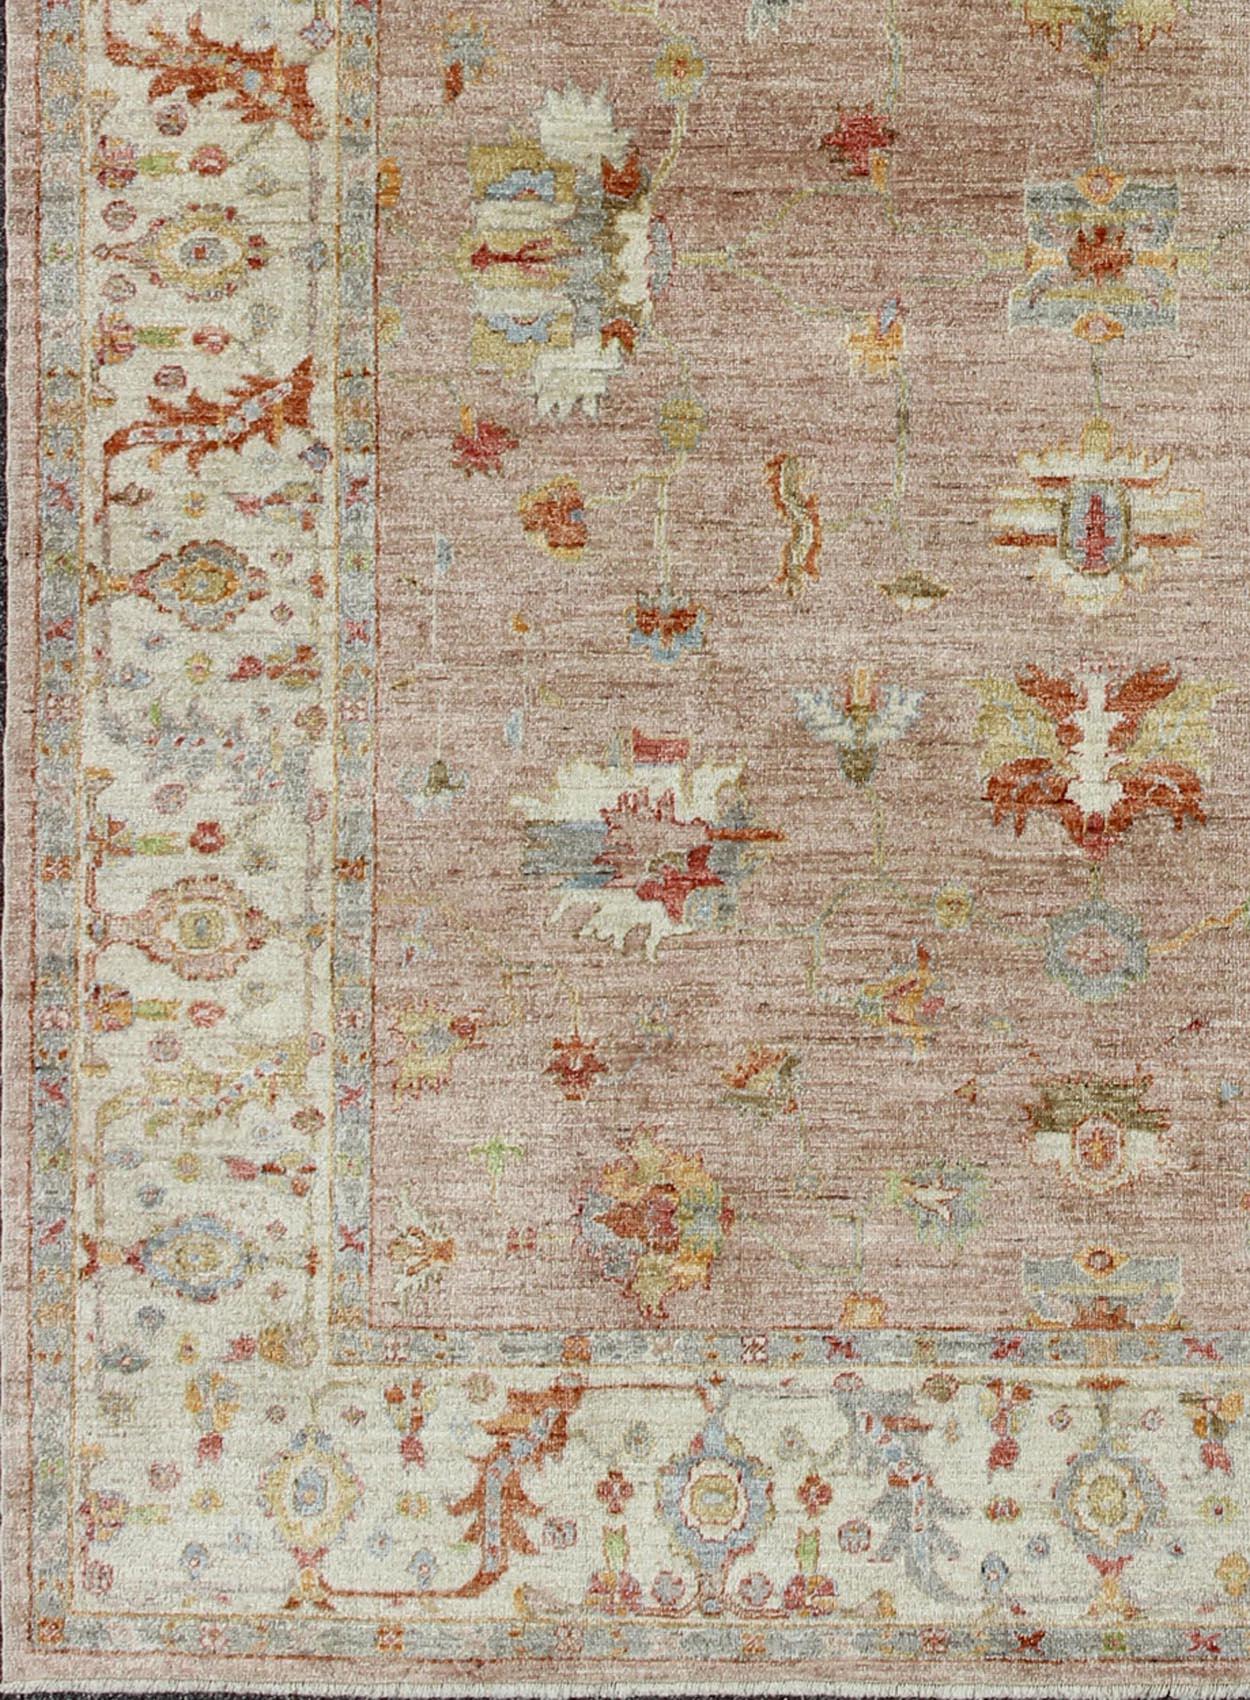 Angora Turkish Oushak Rug in Dusty Pink and Ivory by Keivan Woven Arts , rug an-129862, country of origin / type: Turkey / Angora Oushak.
Measures: 11'8 x 15'4.
From our Angora collection, this piece is made with a combination of angora and old